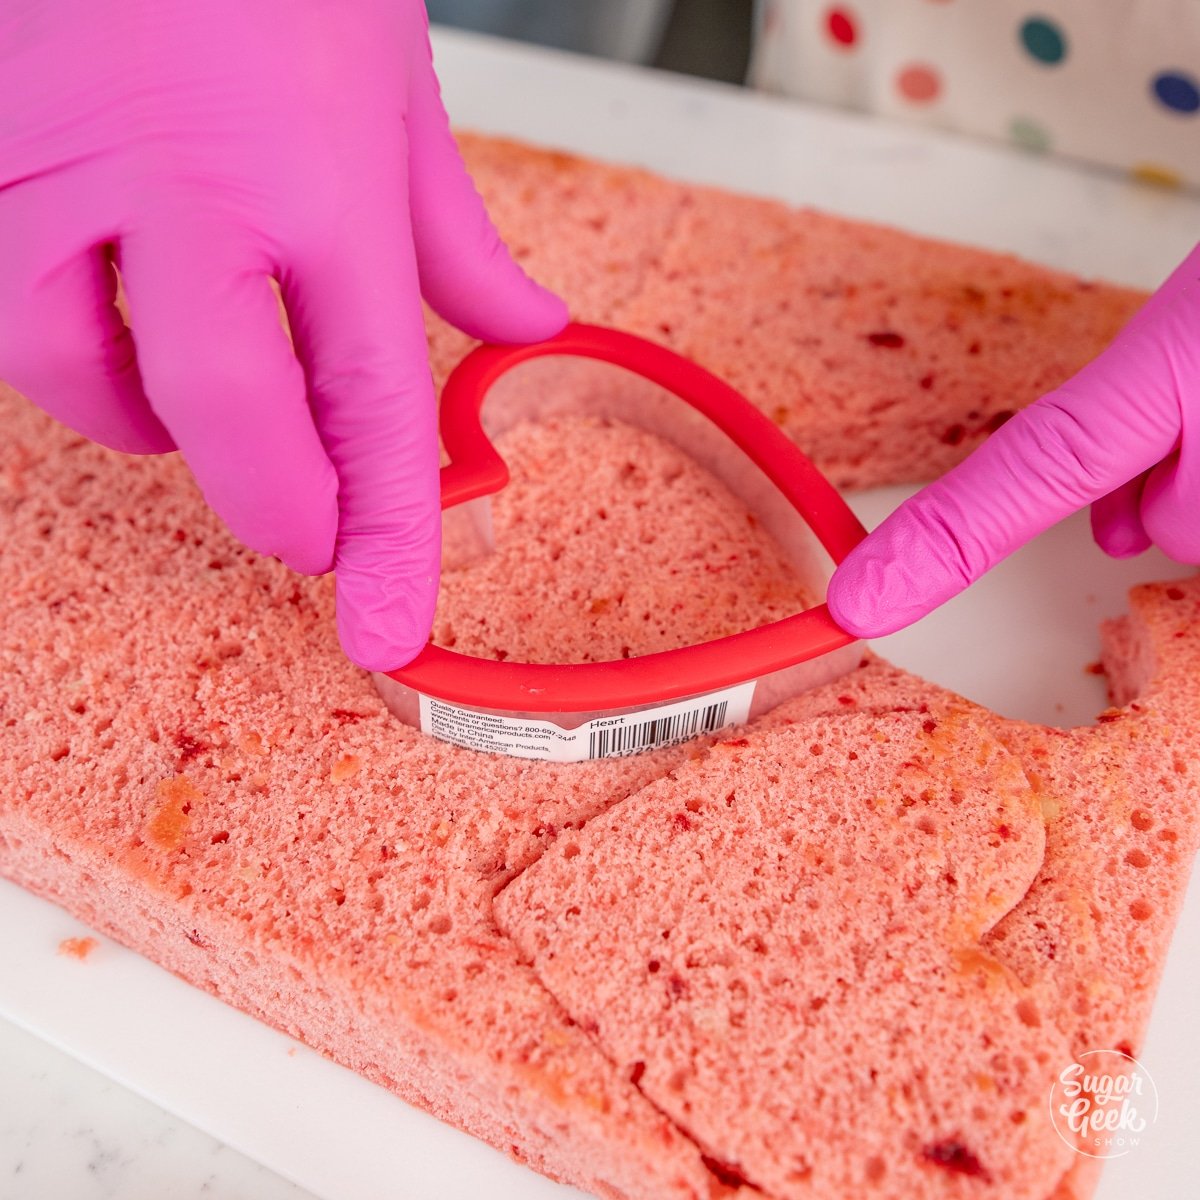 hands pushing a heart shaped cutter into a pink cake